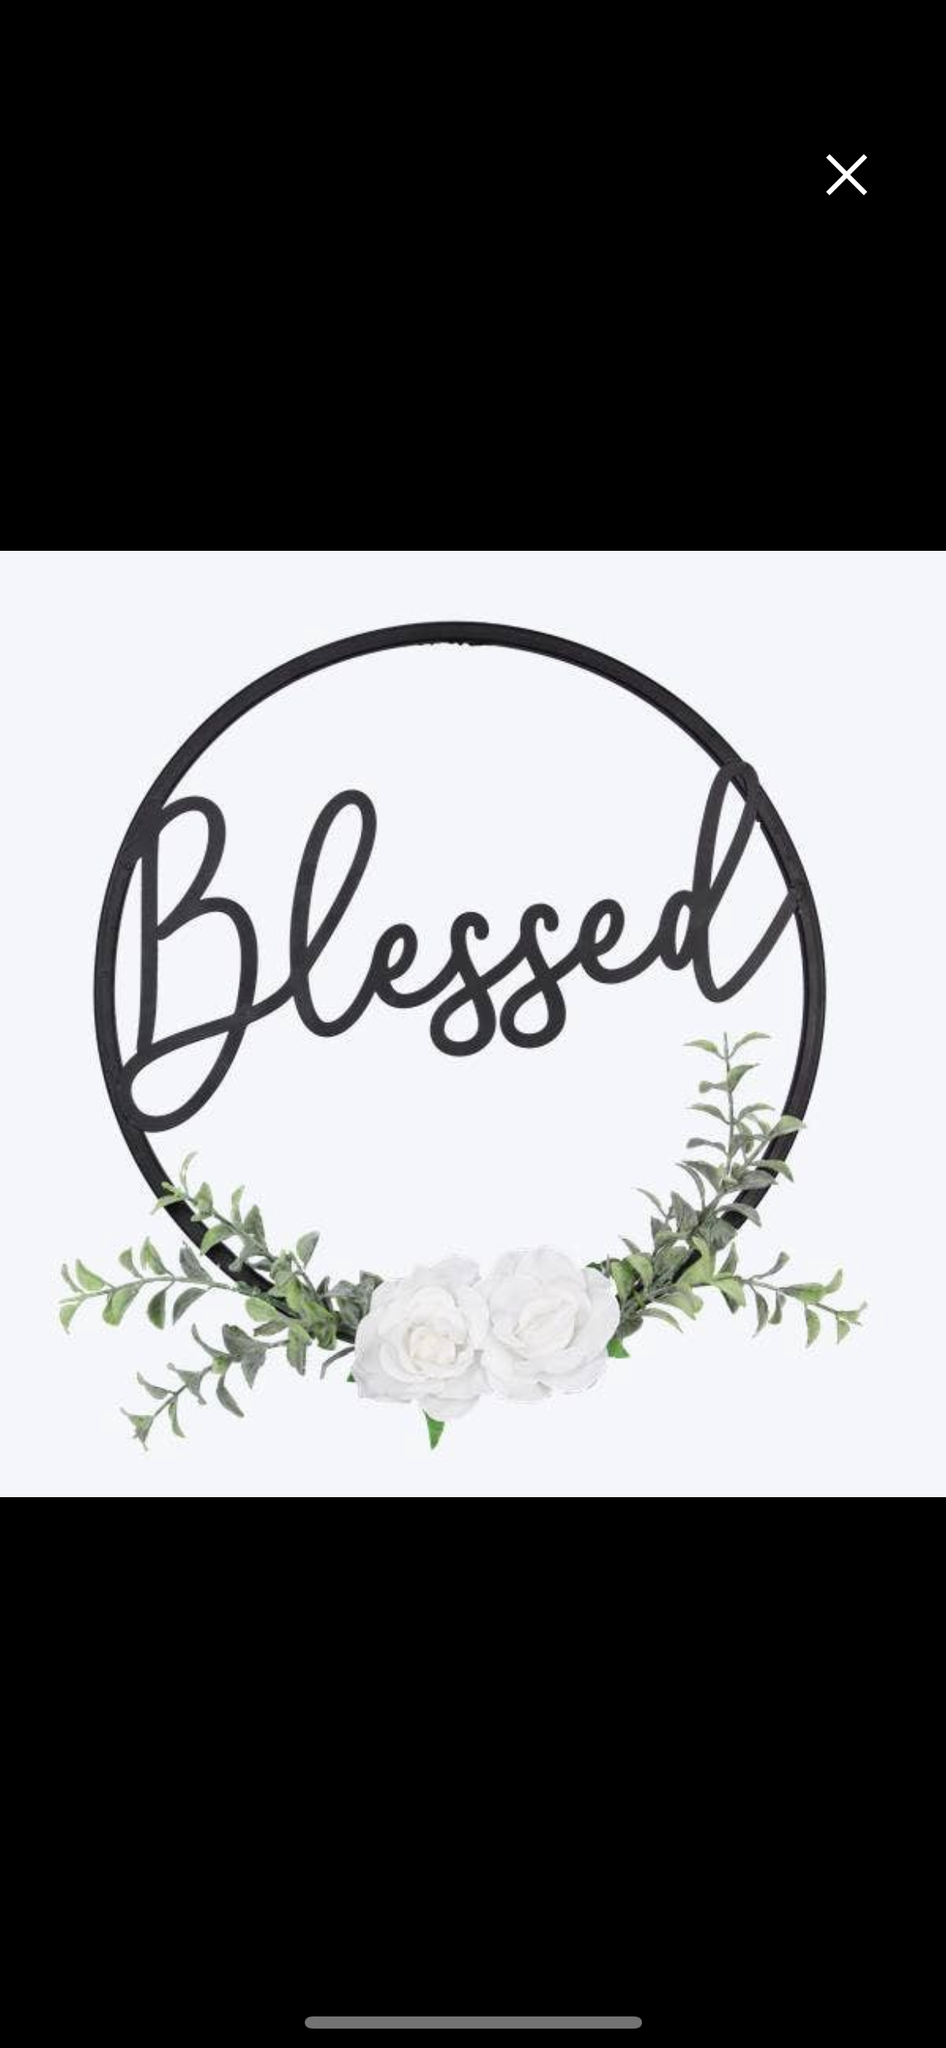 Blessed Metal Wall Sign